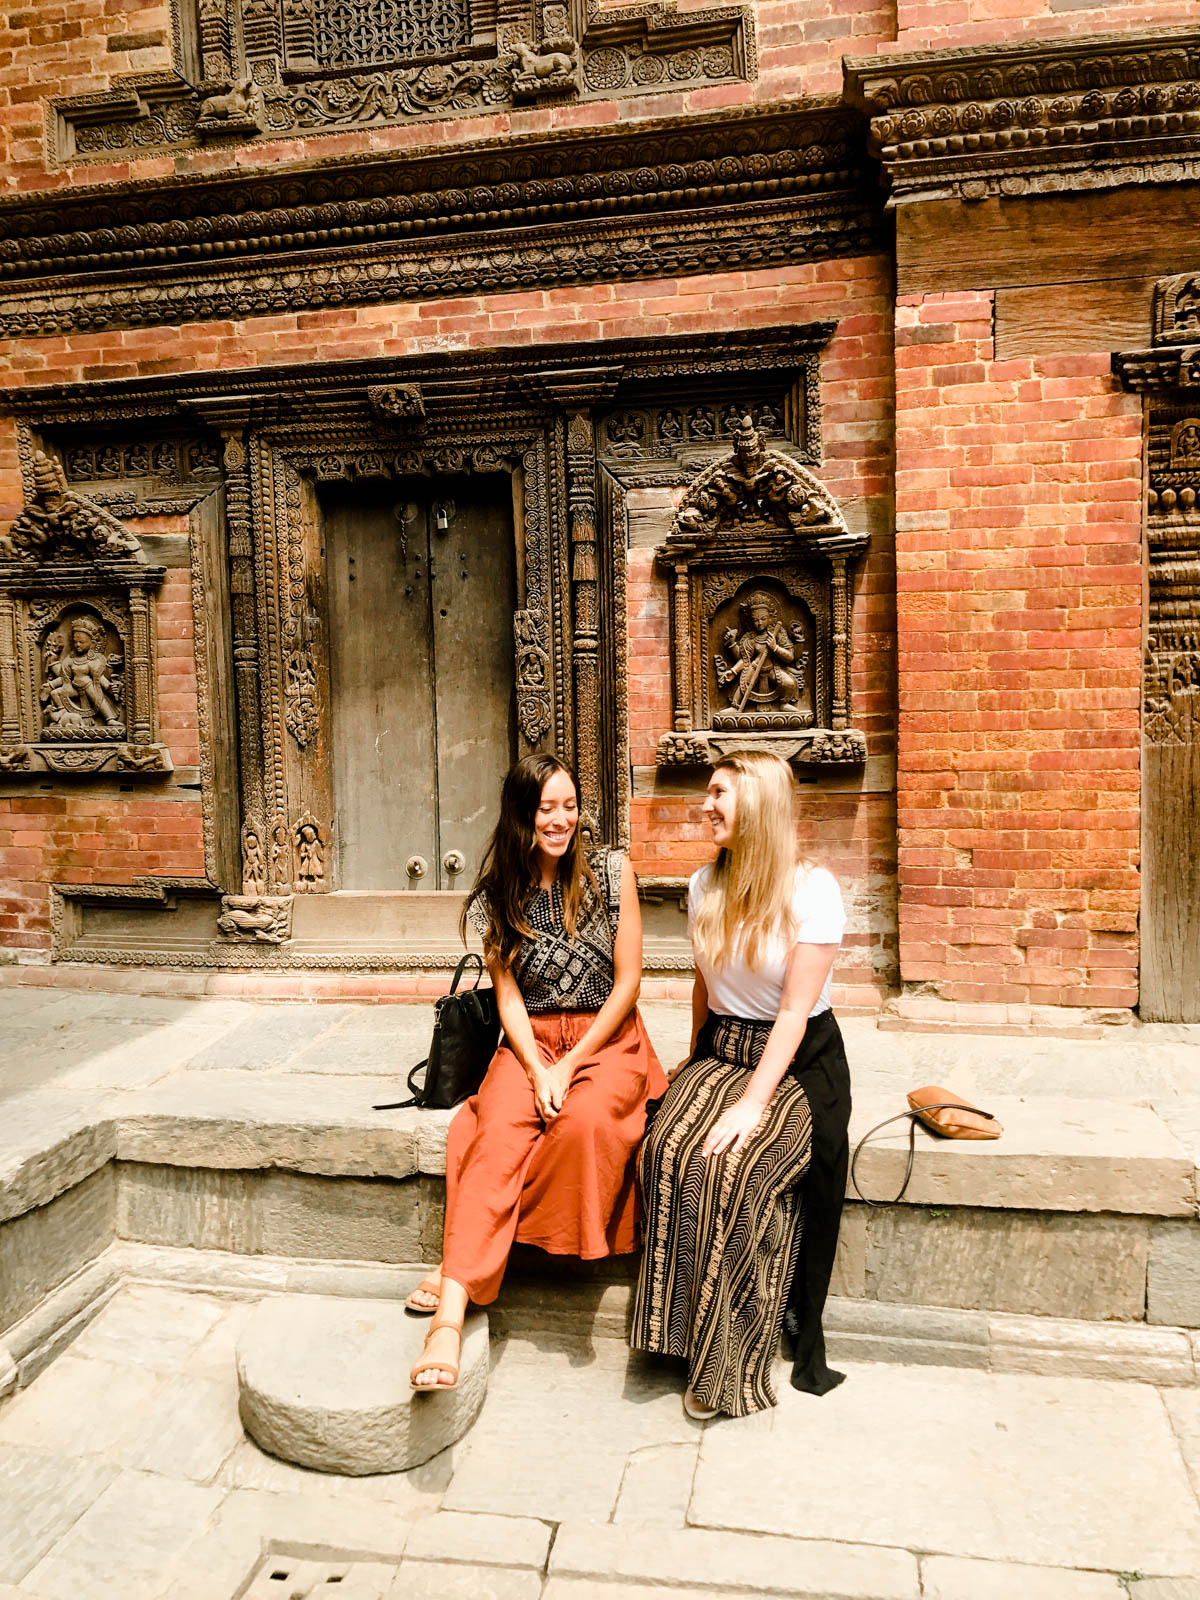 Our trip to Nepal was an oh-so exciting experience, and one we will never forget! Neither of us had ever been to Nepal before, so packing the perfect items was definitely high on our list, so we could do all the exploring we wanted, while still being comfy and ready for those adorbs IG pics ;)